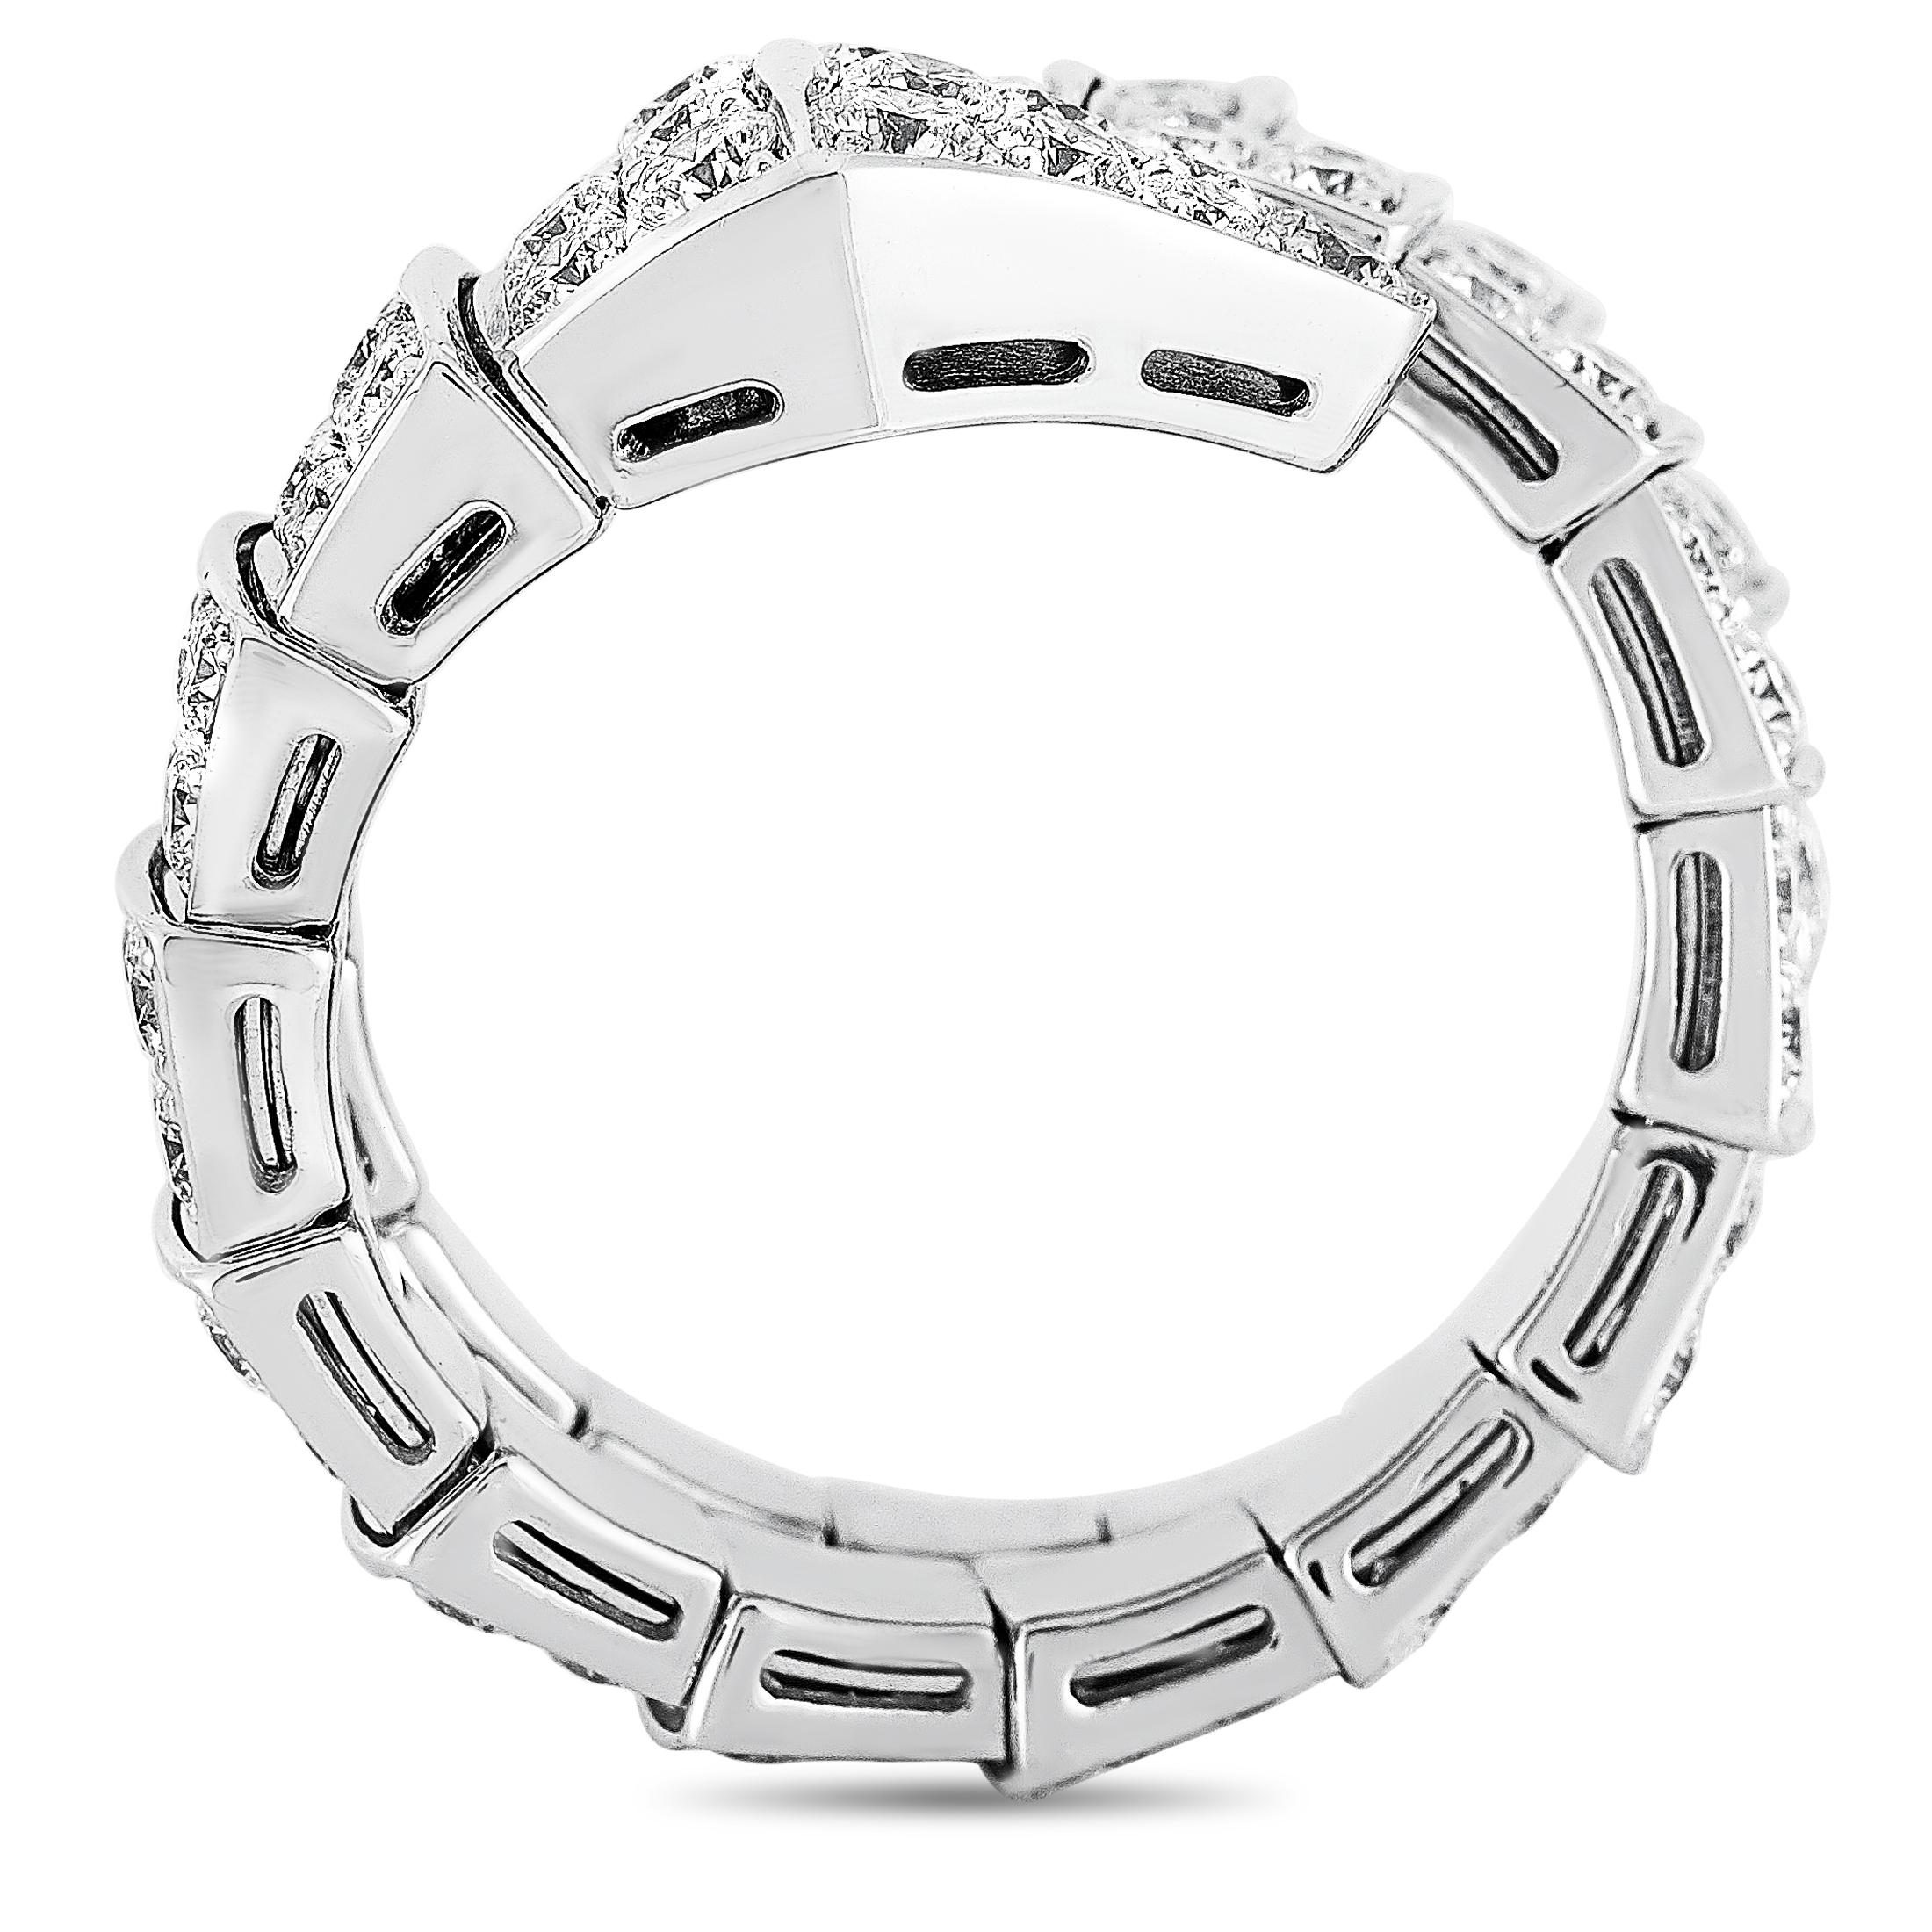 The Bvlgari “Serpenti Viper” ring is crafted from 18K white gold and embellished with two rows of diamonds. The ring boasts band thickness of 10 mm and top height of 4 mm. Size Medium

This jewelry piece is offered in brand new condition and